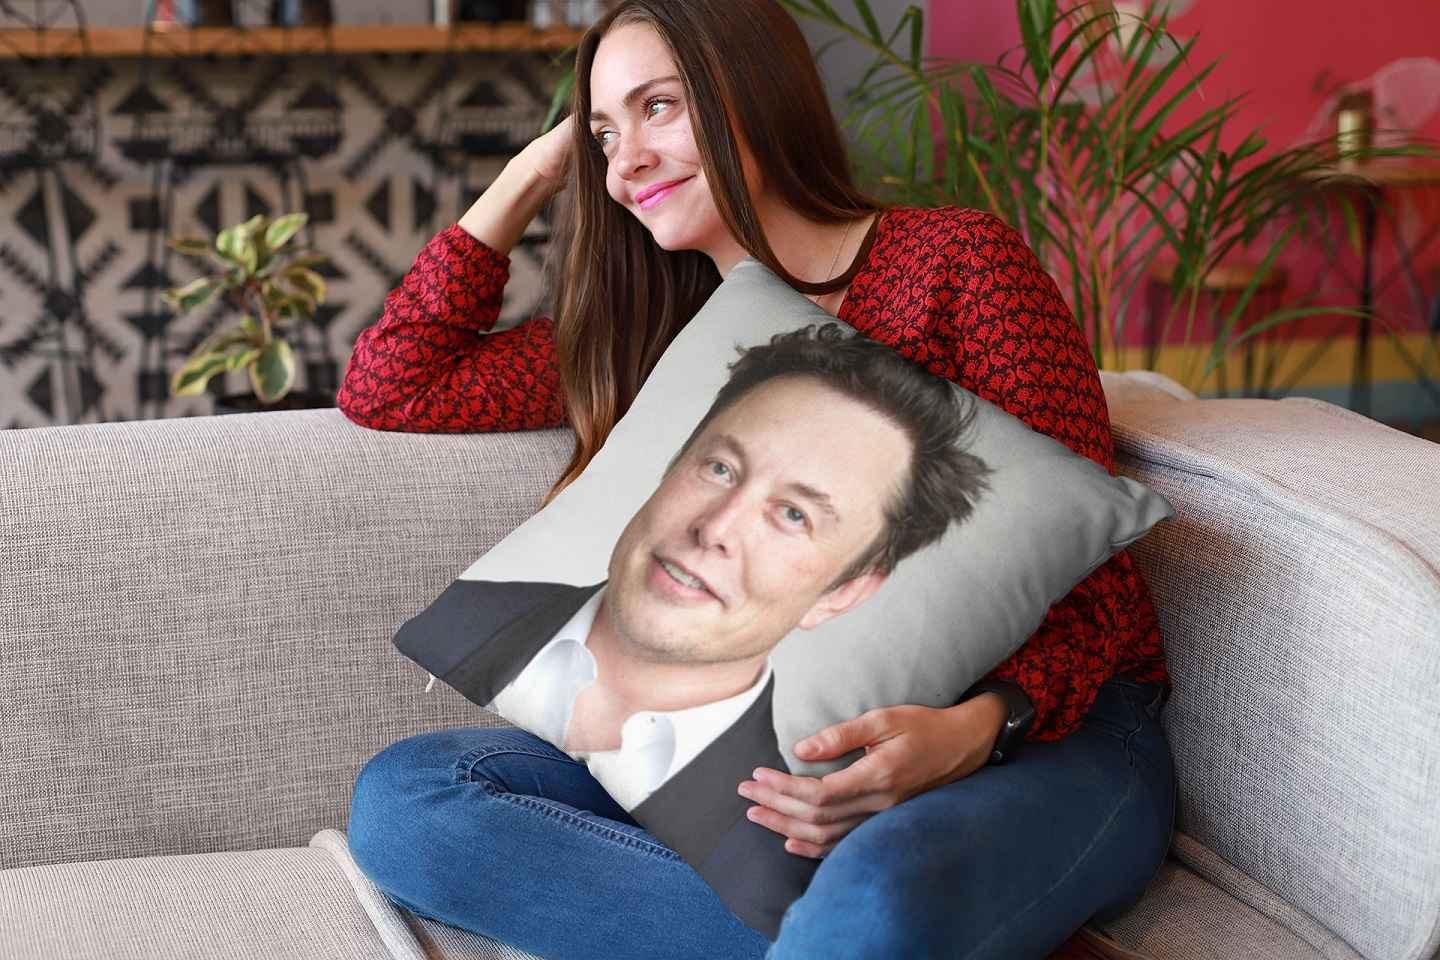 A young woman on a sofa holding an Elon Musk pillow and trying not to laugh.